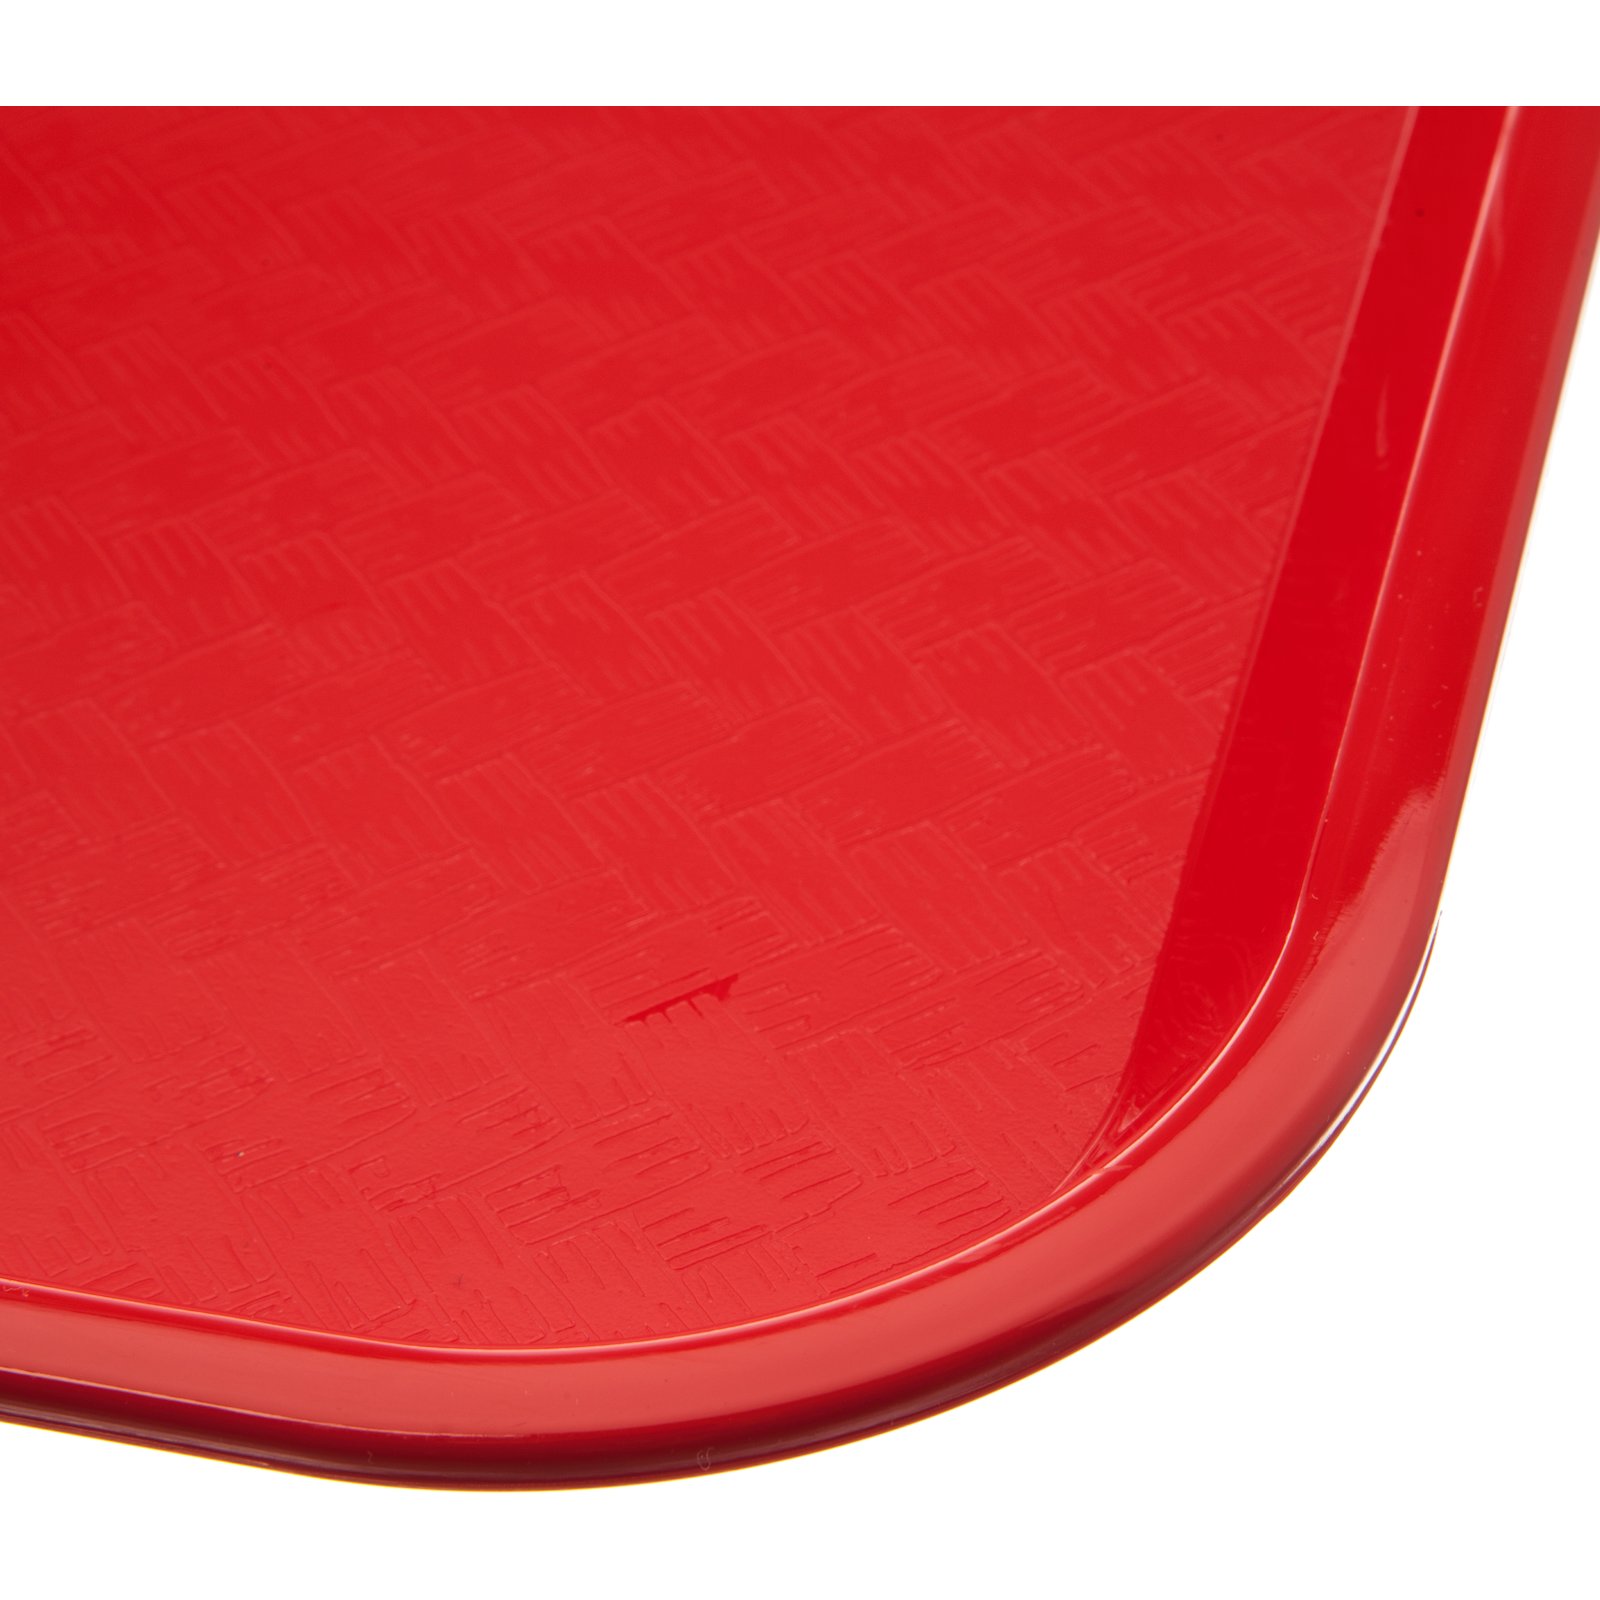 Carlisle Food Service Products Cafe Standard Tray (Set of 12) Size: 18 W x 14 D, Color: Red